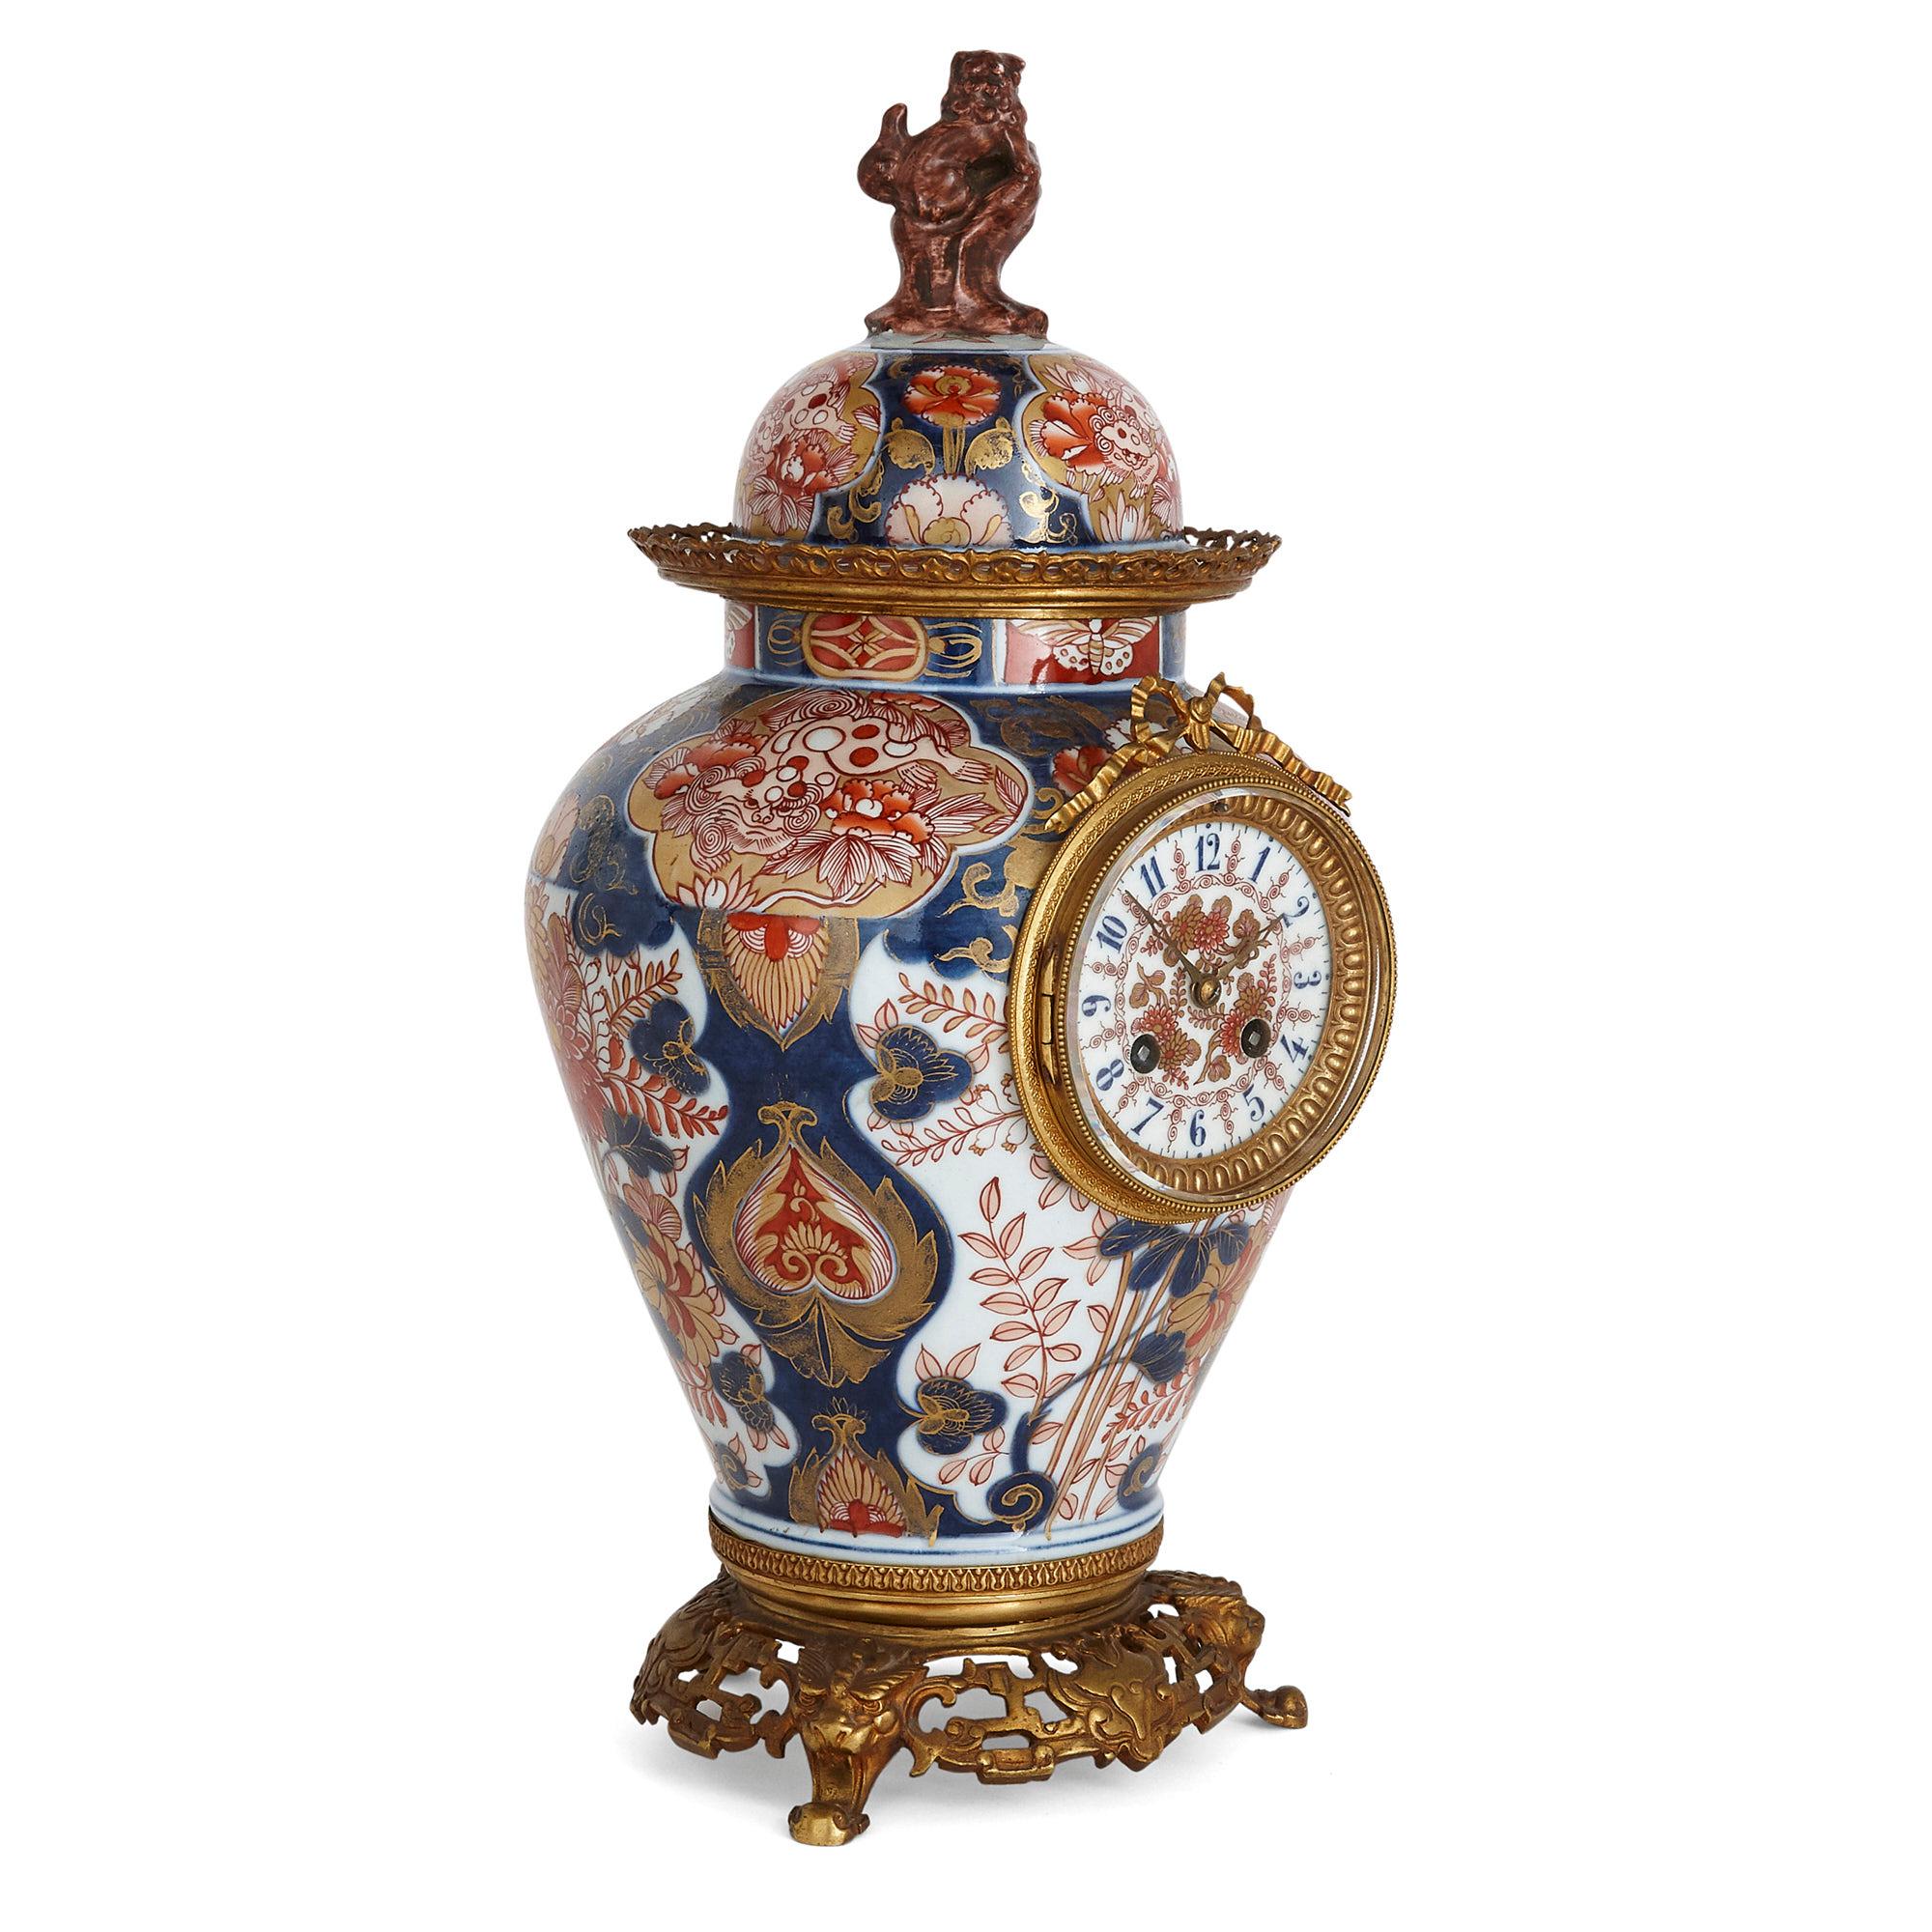 Antique three-piece Meiji period Japonisme vase clock set
French/Japanese, late 19th century
Measures: Clock height 47cm, diameter 22cm
Candelabra height 55cm, width 25cm, depth 25cm

Consisting of a central vase-form mantel clock and two